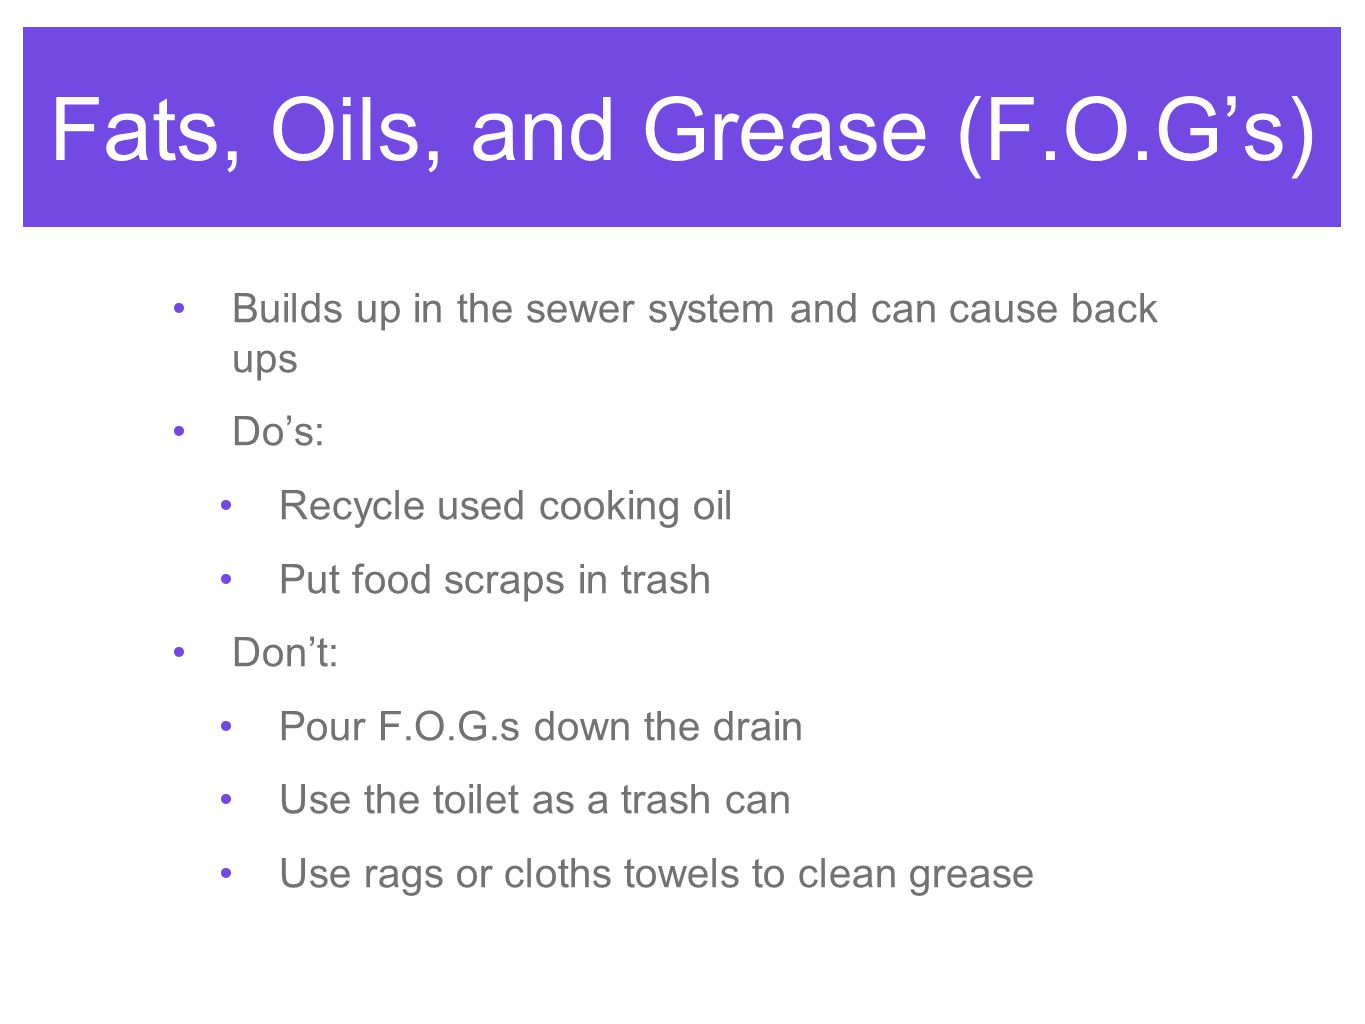 Fats, Oils, and Grease (F.O.G’s)